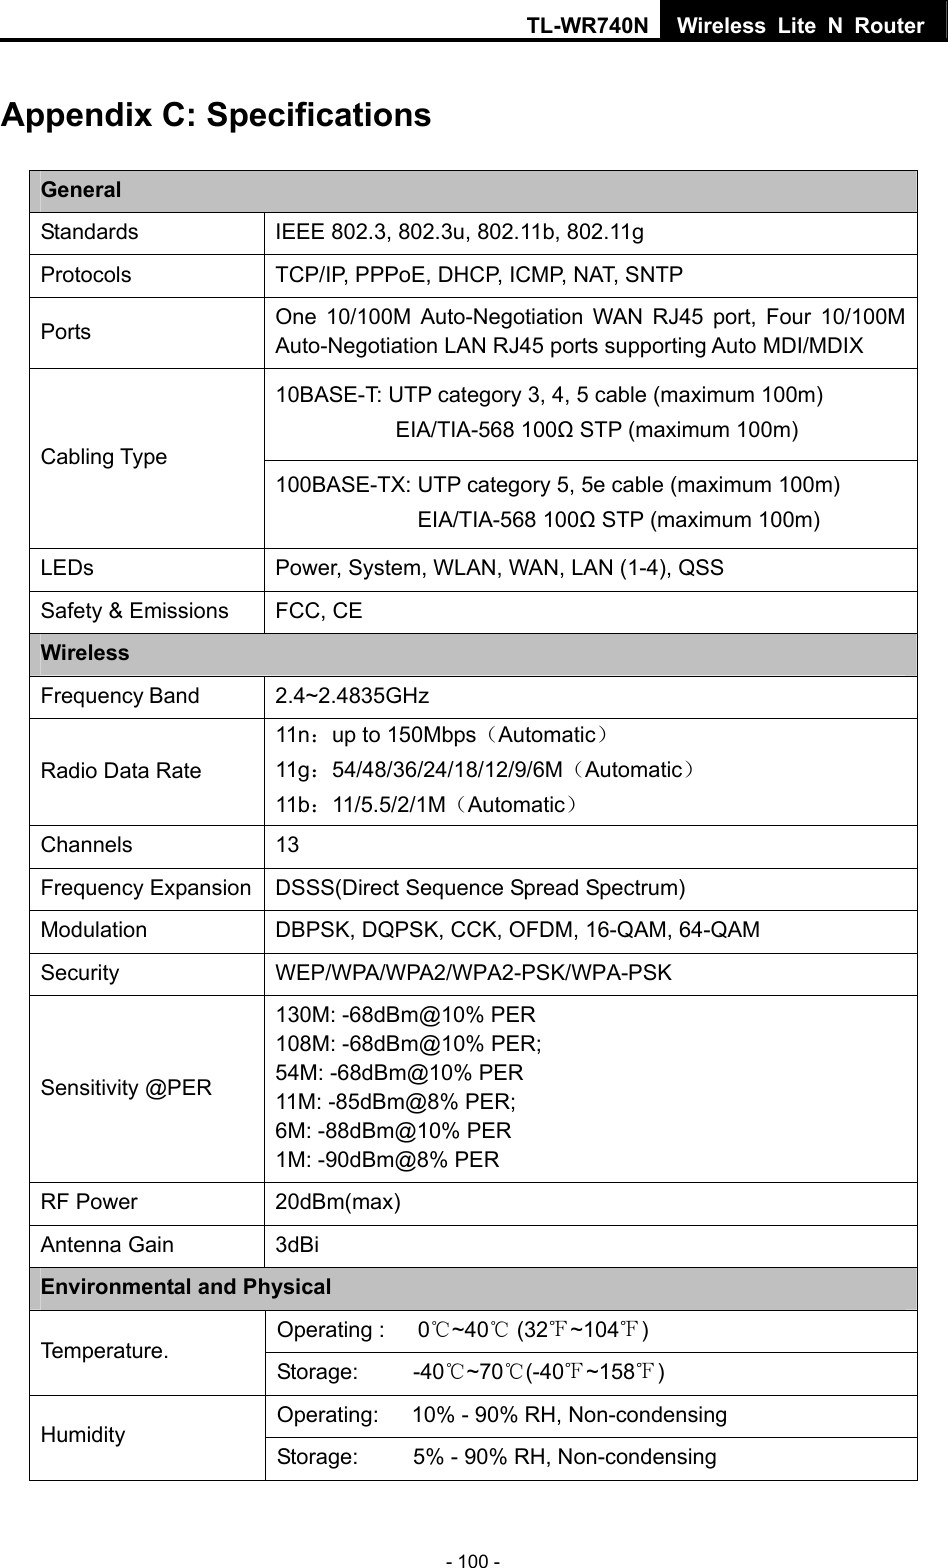 TL-WR740N Wireless Lite N Router  - 100 - Appendix C: Specifications General Standards IEEE 802.3, 802.3u, 802.11b, 802.11g Protocols  TCP/IP, PPPoE, DHCP, ICMP, NAT, SNTP Ports  One 10/100M Auto-Negotiation WAN RJ45 port, Four 10/100M Auto-Negotiation LAN RJ45 ports supporting Auto MDI/MDIX 10BASE-T: UTP category 3, 4, 5 cable (maximum 100m) EIA/TIA-568 100Ω STP (maximum 100m) Cabling Type 100BASE-TX: UTP category 5, 5e cable (maximum 100m) EIA/TIA-568 100Ω STP (maximum 100m) LEDs  Power, System, WLAN, WAN, LAN (1-4), QSS Safety &amp; Emissions  FCC, CE Wireless Frequency Band 2.4~2.4835GHz Radio Data Rate 11n：up to 150Mbps（Automatic） 11g：54/48/36/24/18/12/9/6M（Automatic） 11b：11/5.5/2/1M（Automatic） Channels 13 Frequency Expansion  DSSS(Direct Sequence Spread Spectrum) Modulation  DBPSK, DQPSK, CCK, OFDM, 16-QAM, 64-QAM Security WEP/WPA/WPA2/WPA2-PSK/WPA-PSK Sensitivity @PER 130M: -68dBm@10% PER 108M: -68dBm@10% PER;   54M: -68dBm@10% PER 11M: -85dBm@8% PER;   6M: -88dBm@10% PER 1M: -90dBm@8% PER RF Power  20dBm(max) Antenna Gain  3dBi Environmental and Physical Operating :   0℃~40℃ (32 ~104℉℉) Temperature.  Storage:     -40℃~70℃(-40℉~158℉) Operating:      10% - 90% RH, Non-condensing Humidity  Storage:          5% - 90% RH, Non-condensing 